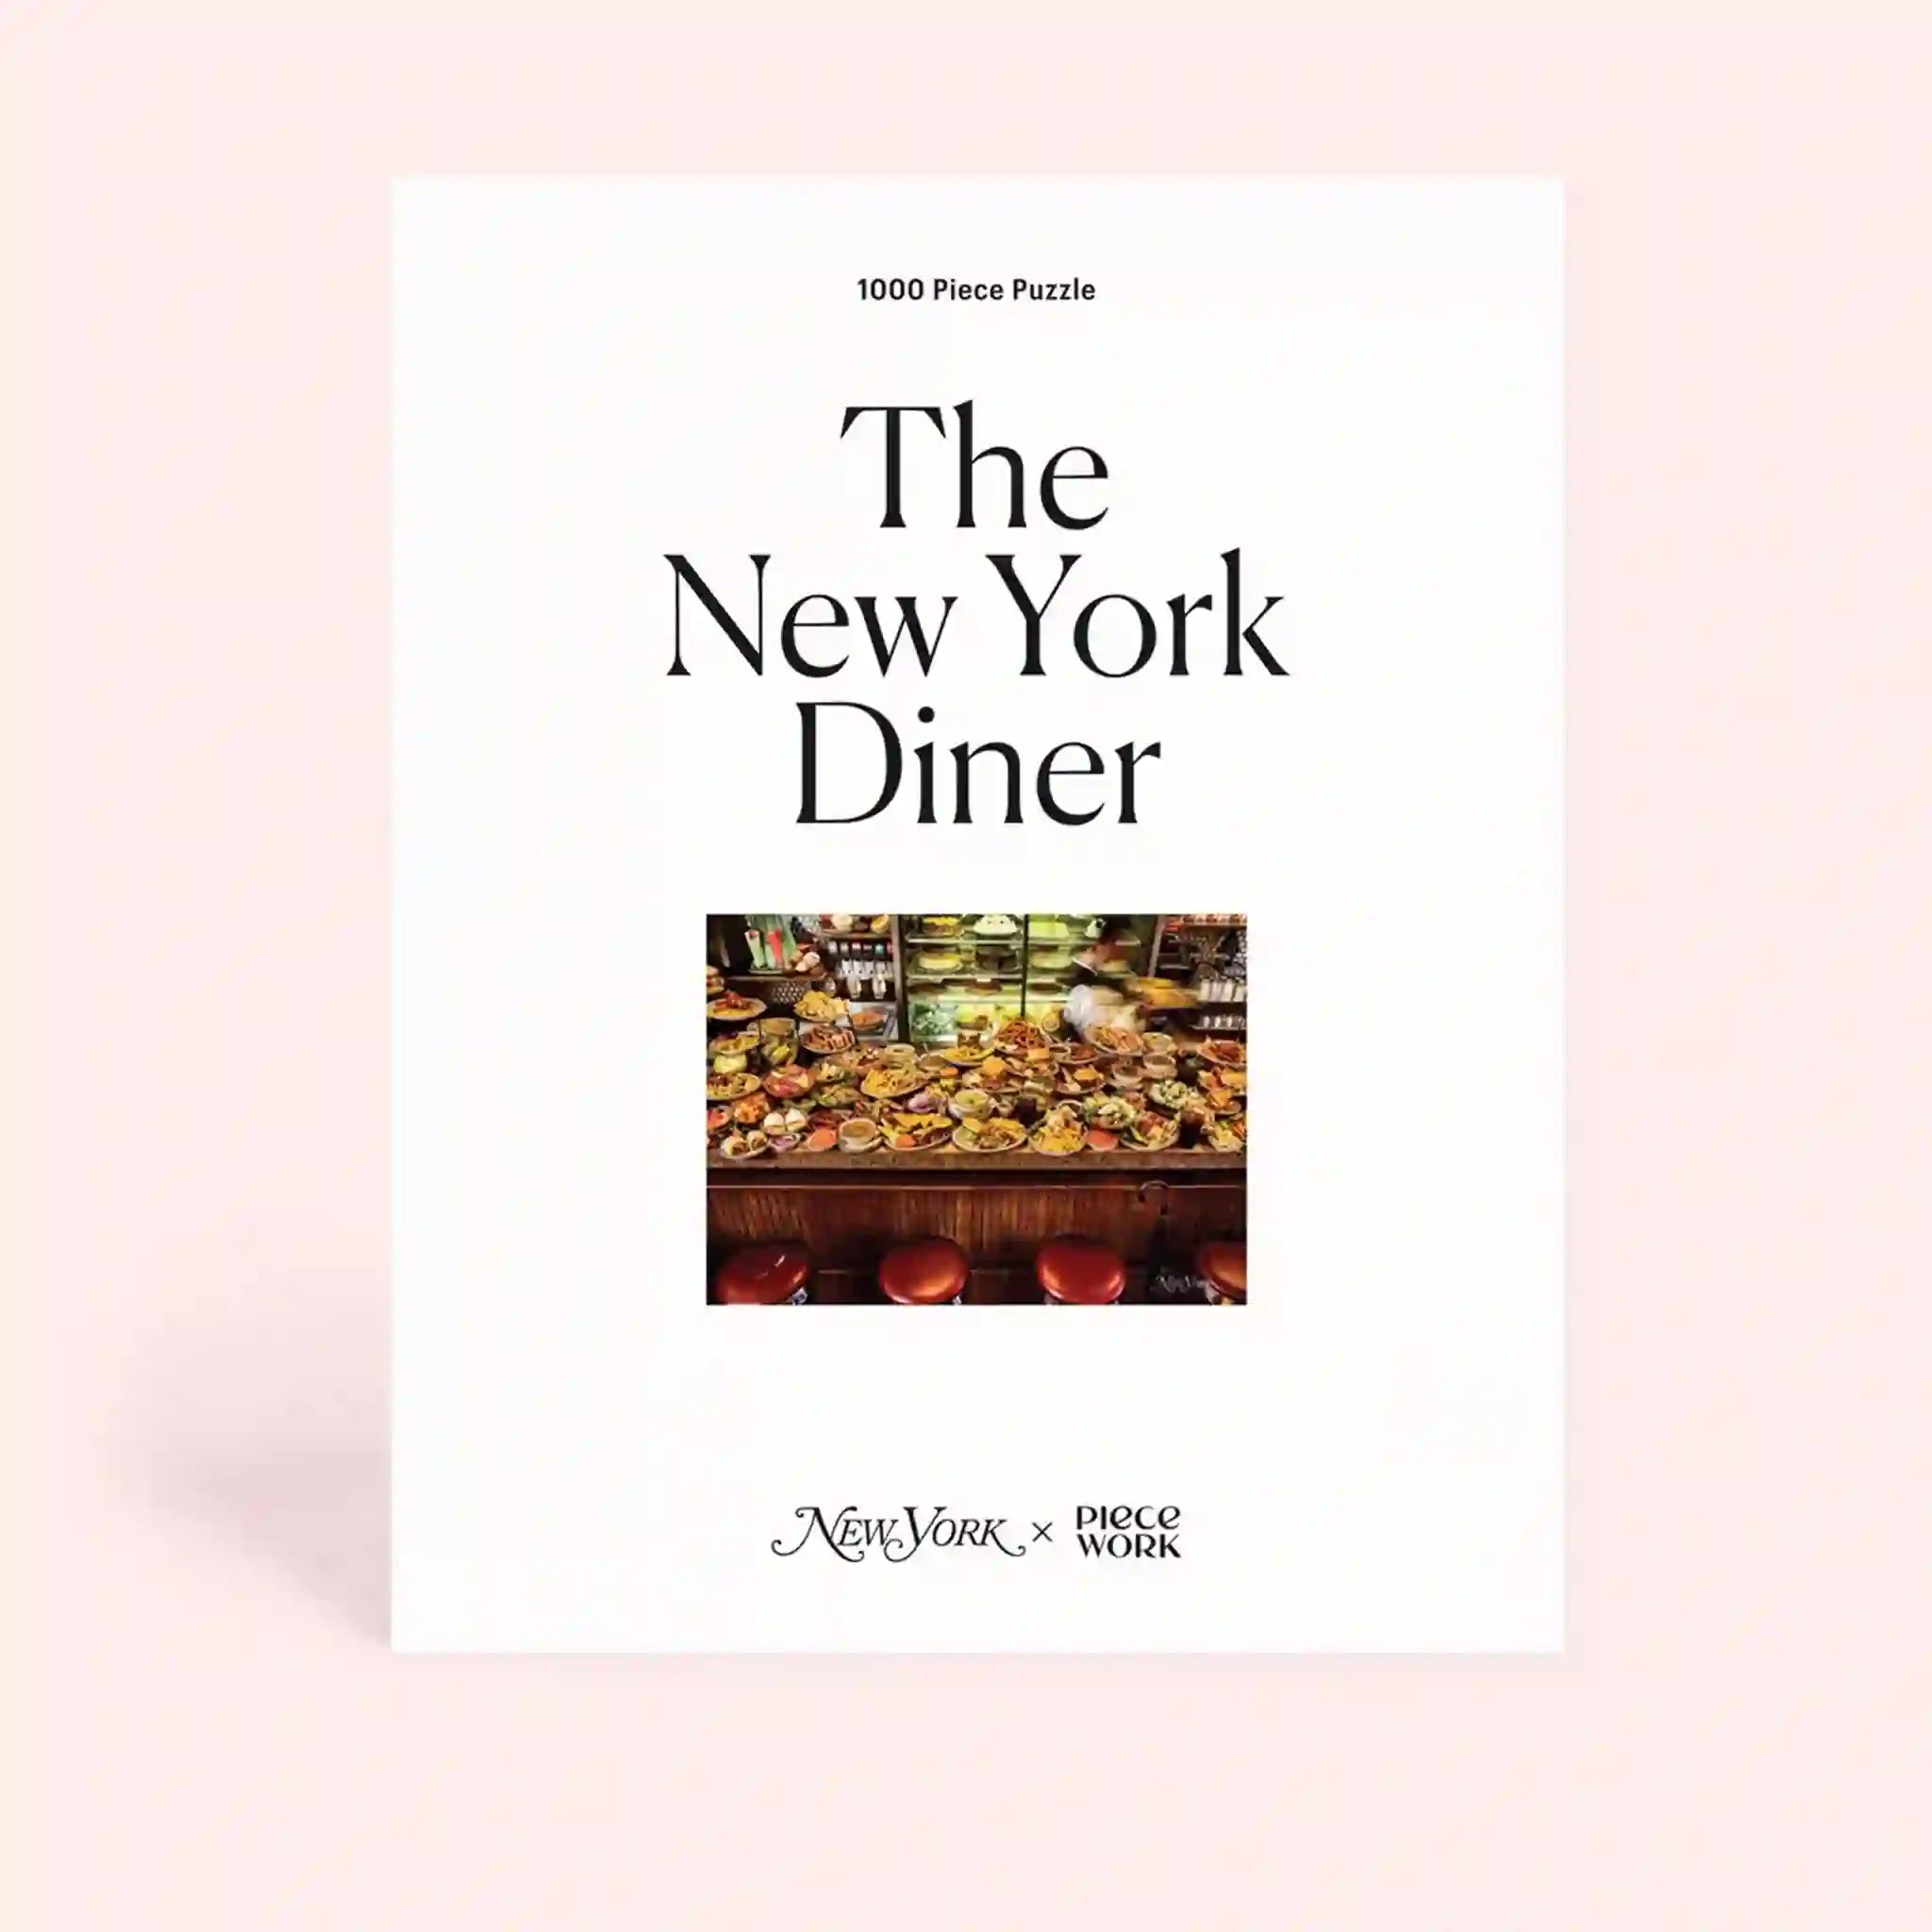 On a pink background is a white puzzle box with black text that reads, &quot;The New York Diner&quot; along with an image of diner food and a bar.